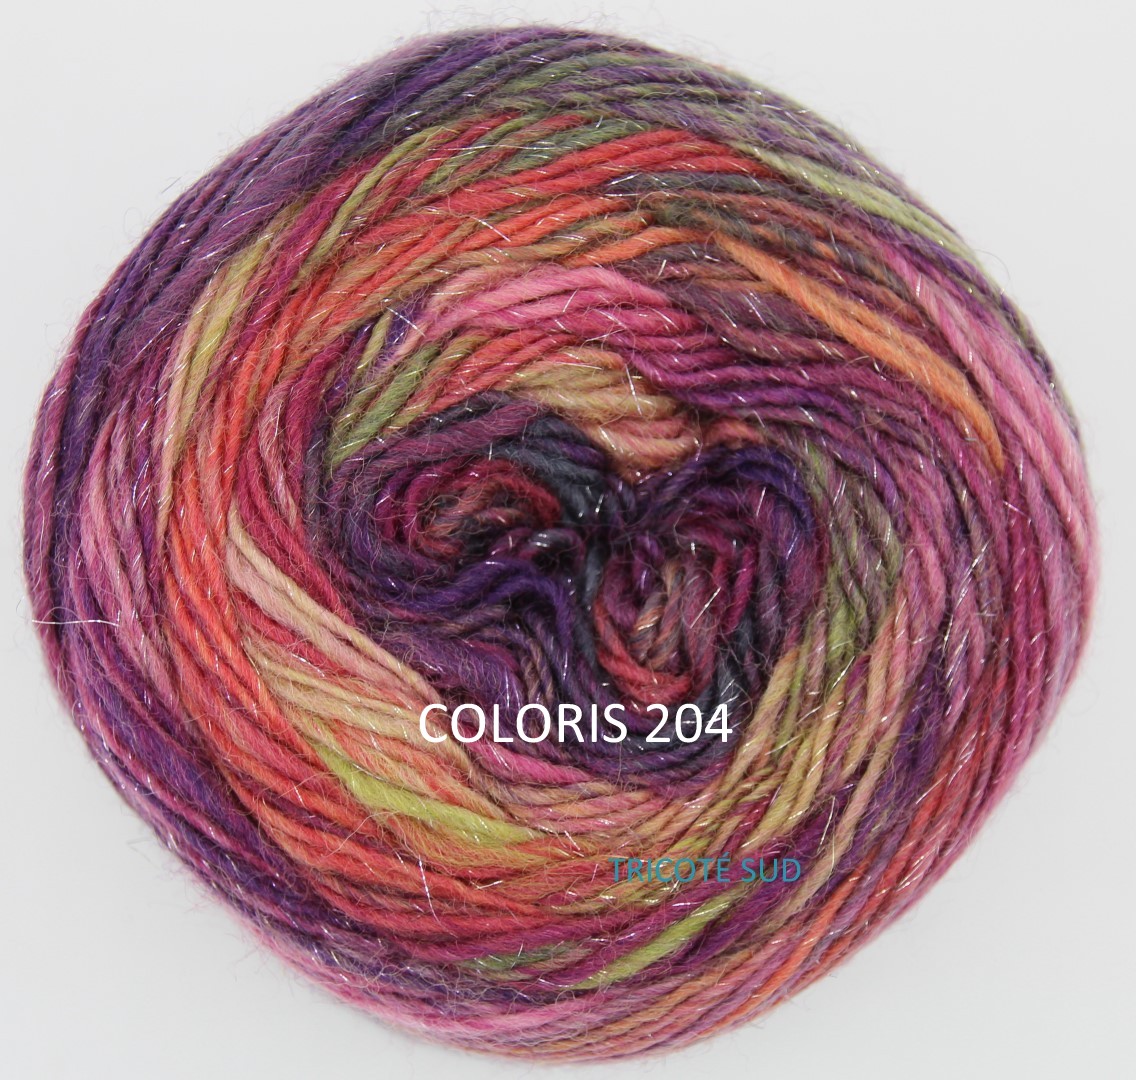 MILLE COLORI SOCKS AND LACE LUXE LANG YARNS COLORIS 204 (2) (Large)